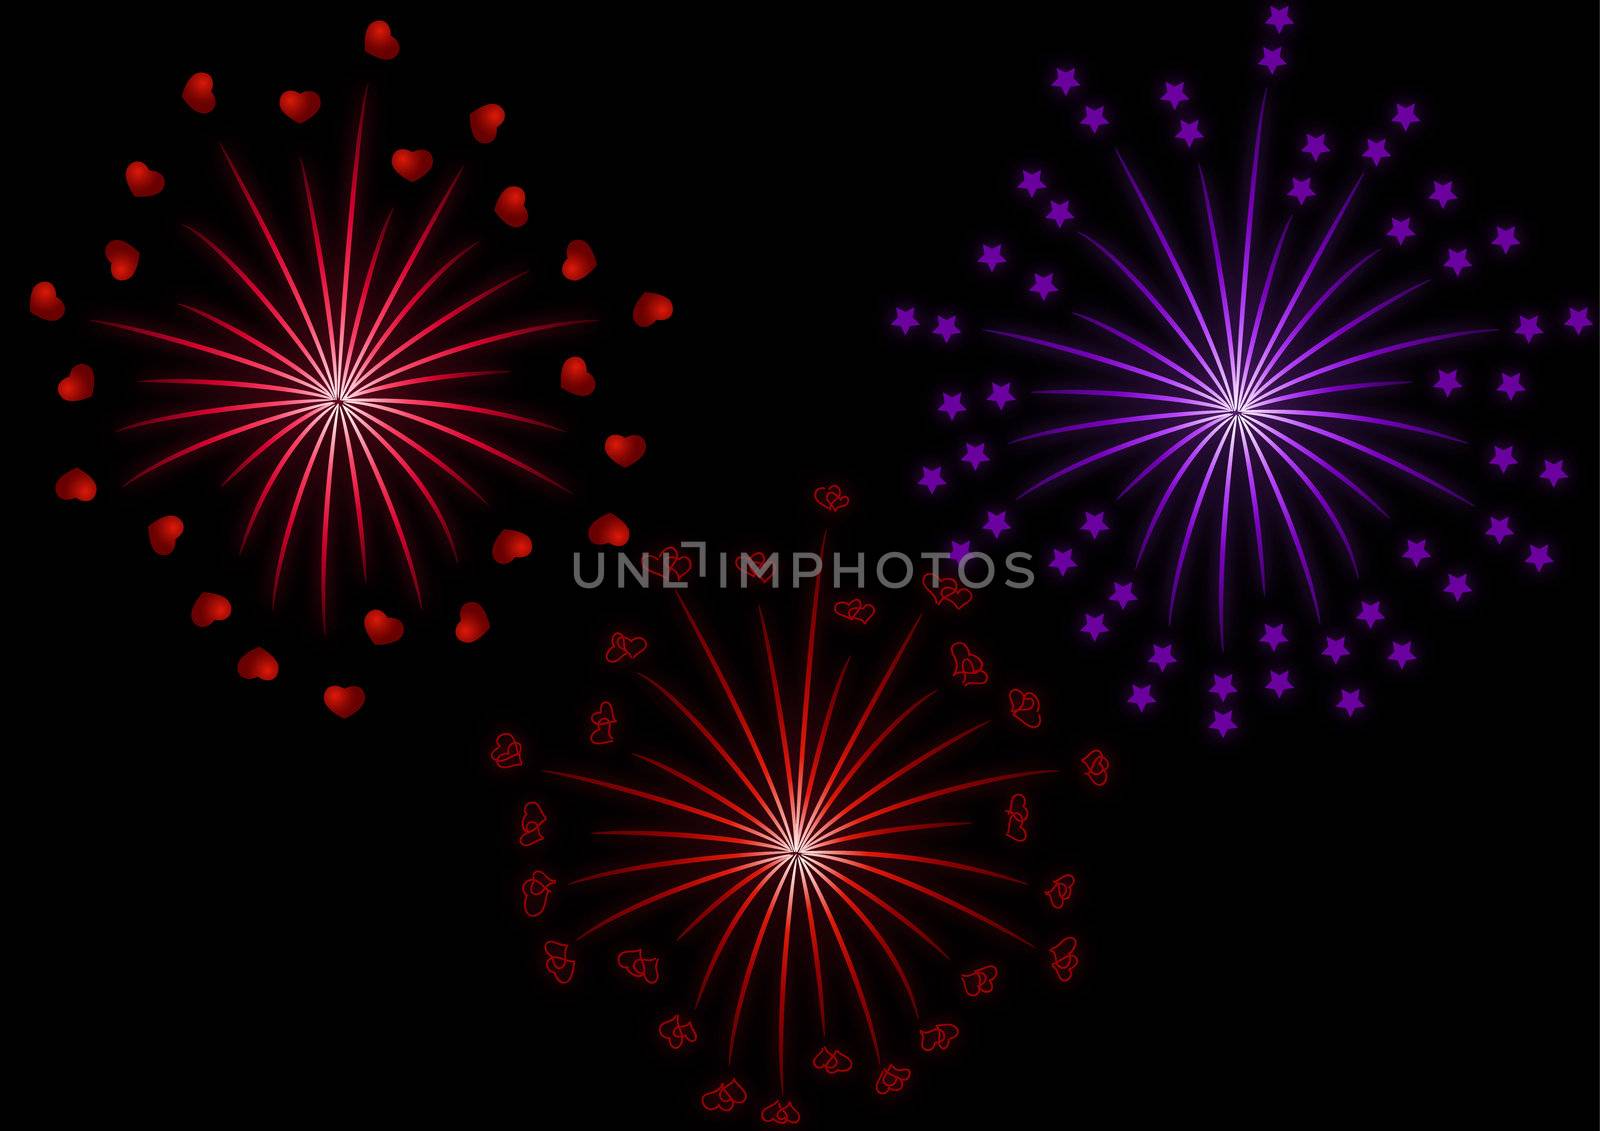 Fireworks set to glow with hearts and stars on a black background